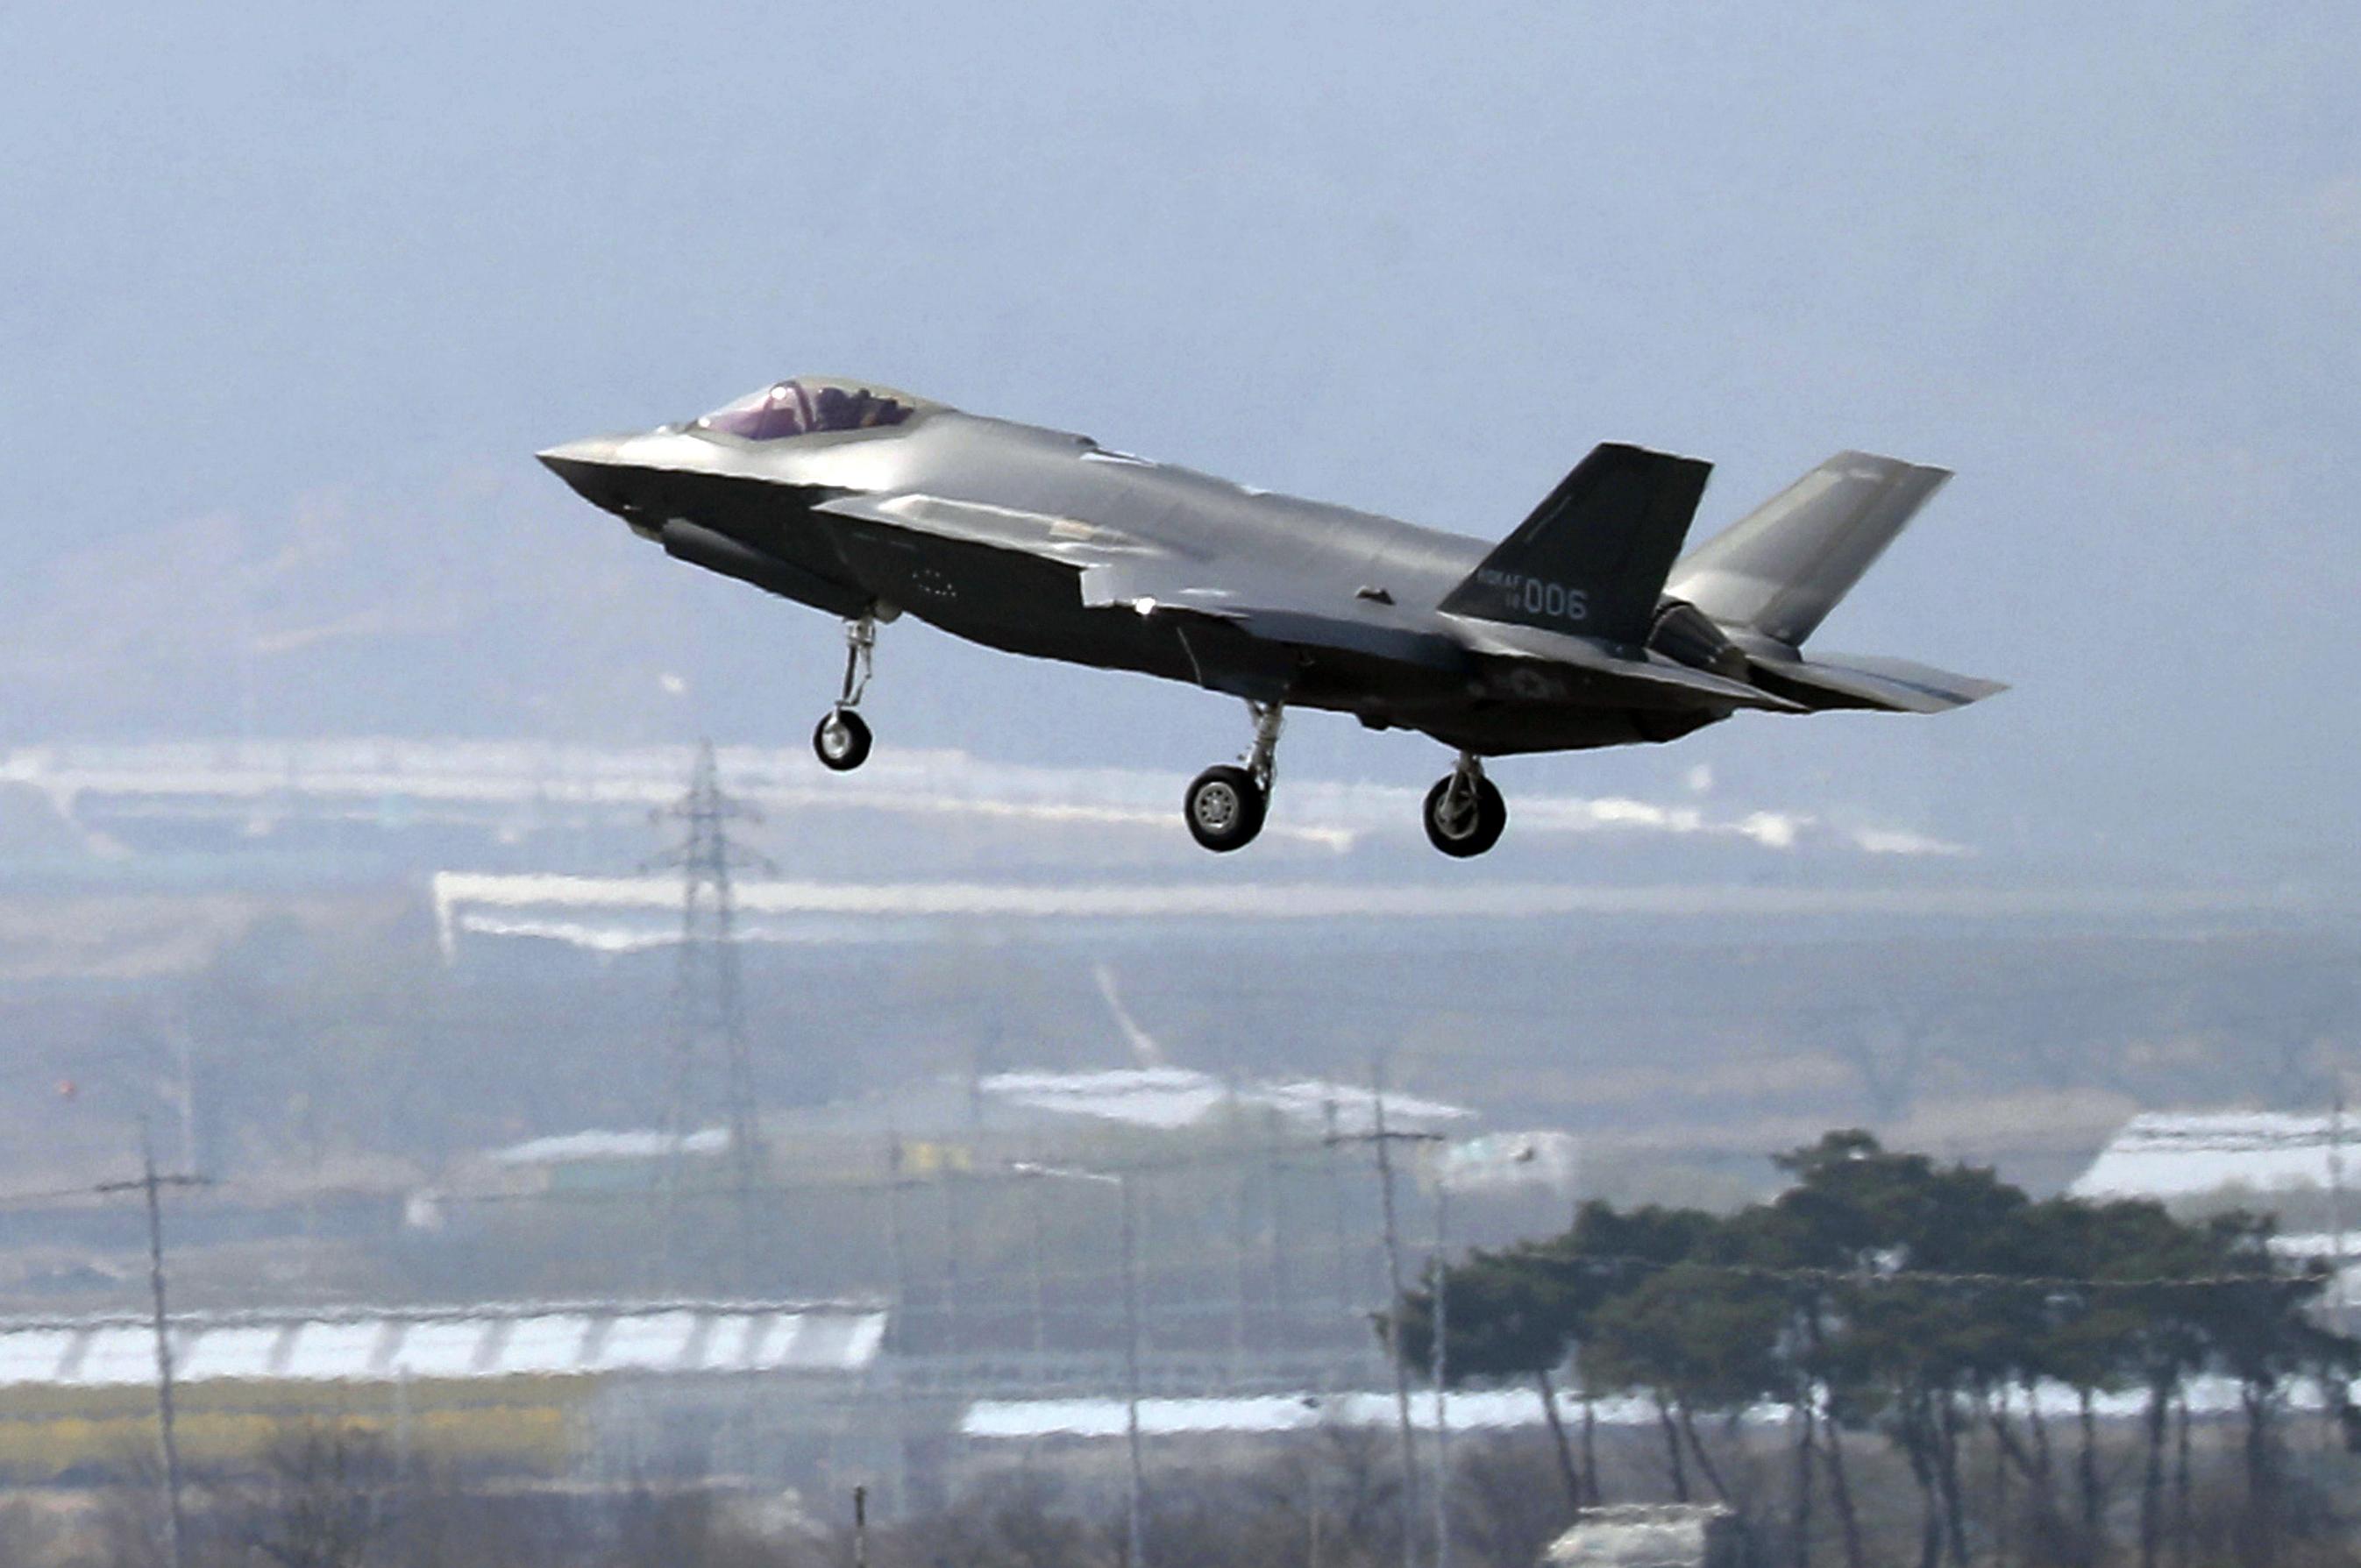 Report: More than 1,000 Madison homes would be ‘incompatible for residential use’ with F-35 jets